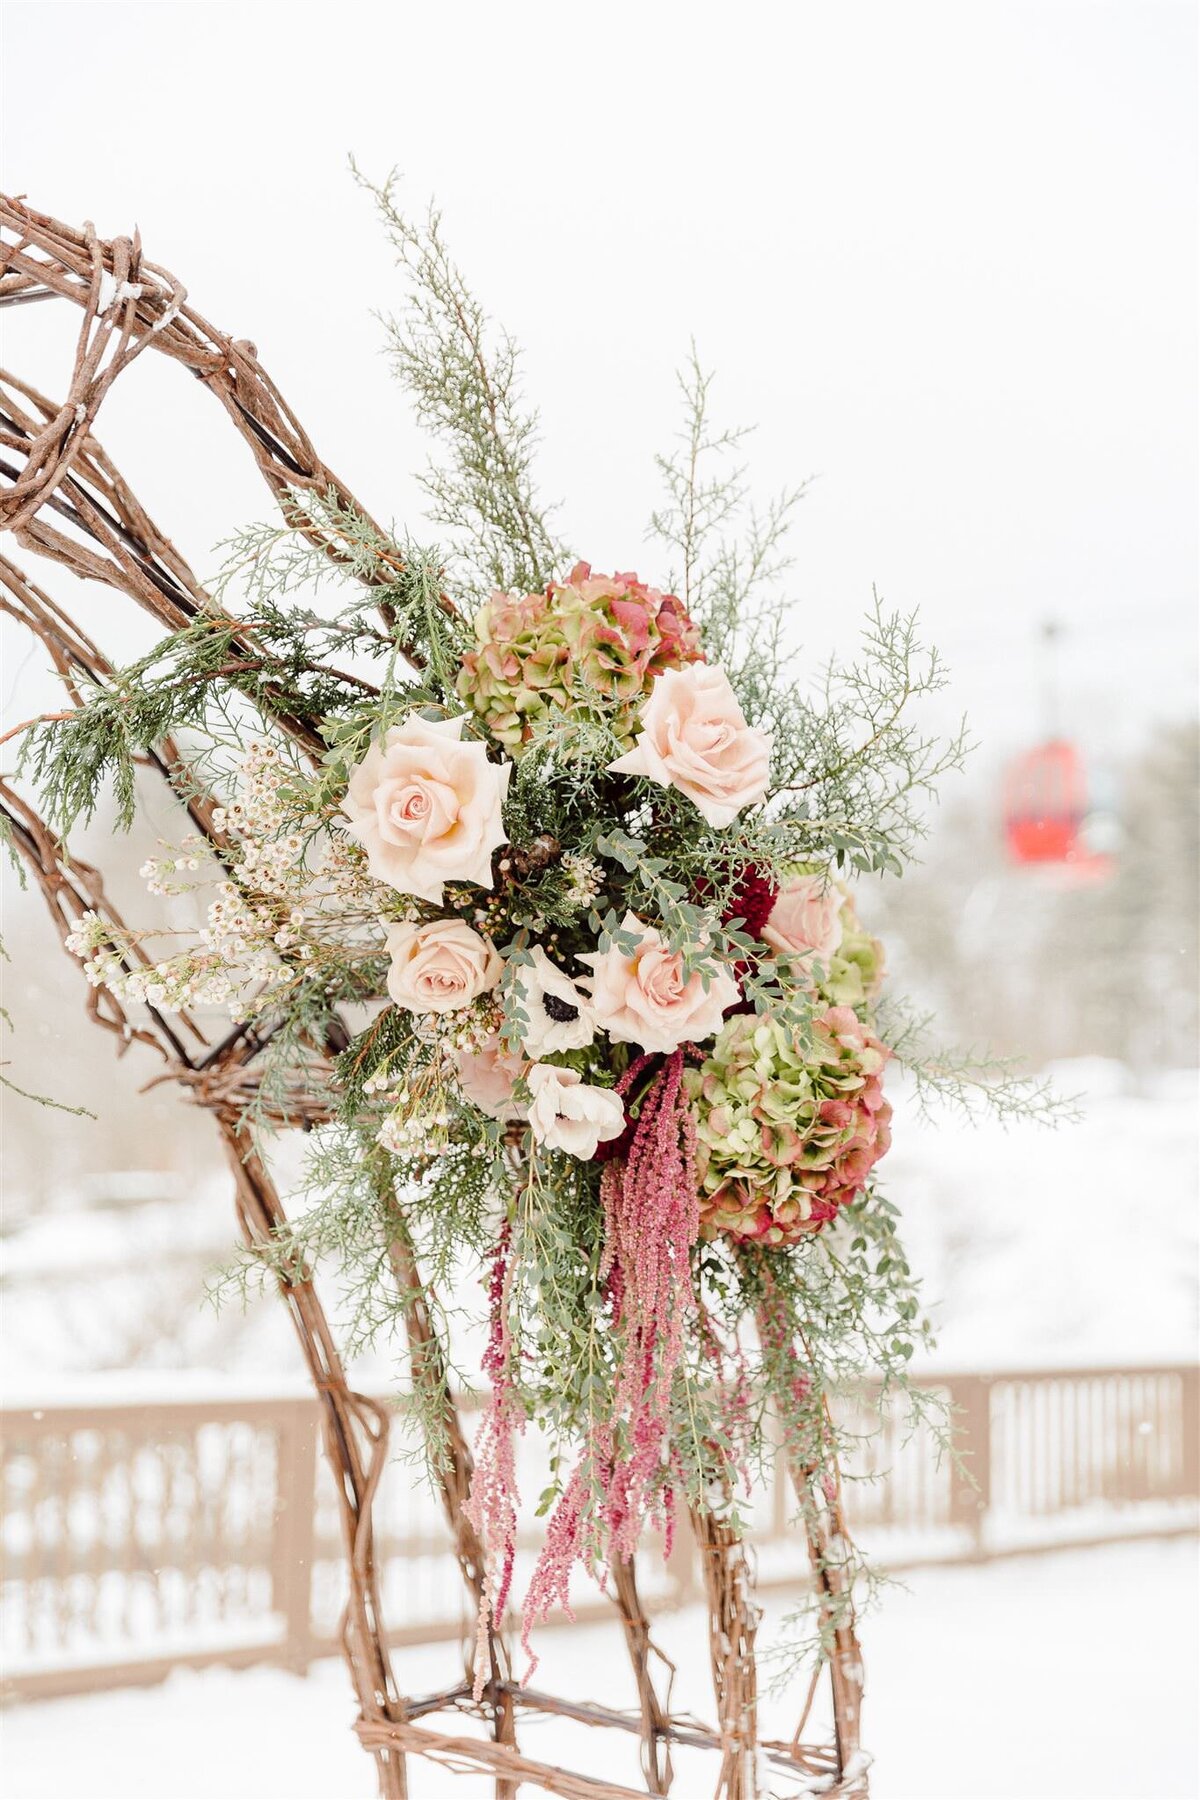 An image of the floral details from a winter wedding at the Lodge at Spruce Peak in Stowe, Vermont